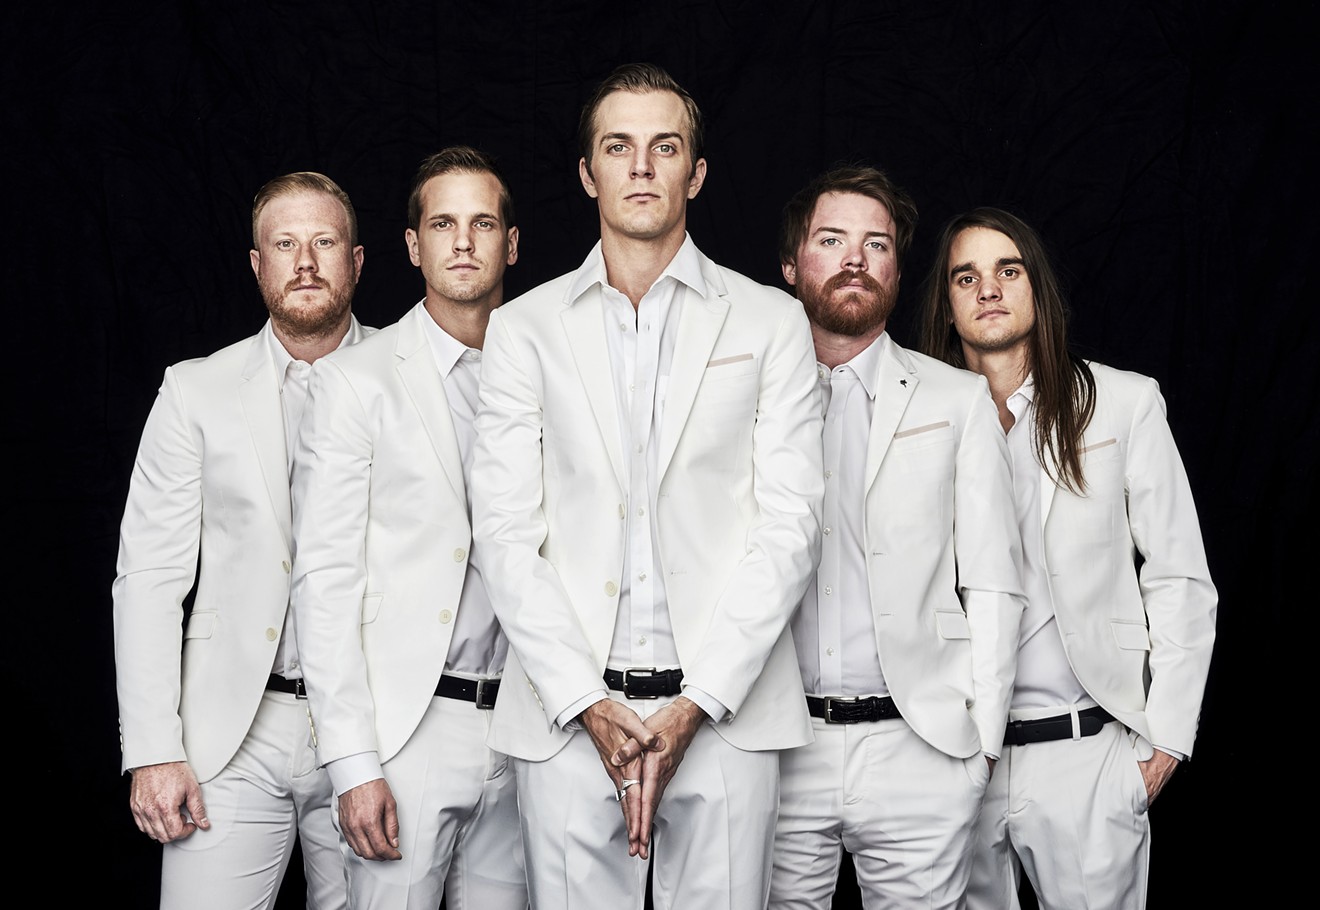 The Maine's debut EP was released in 2007.